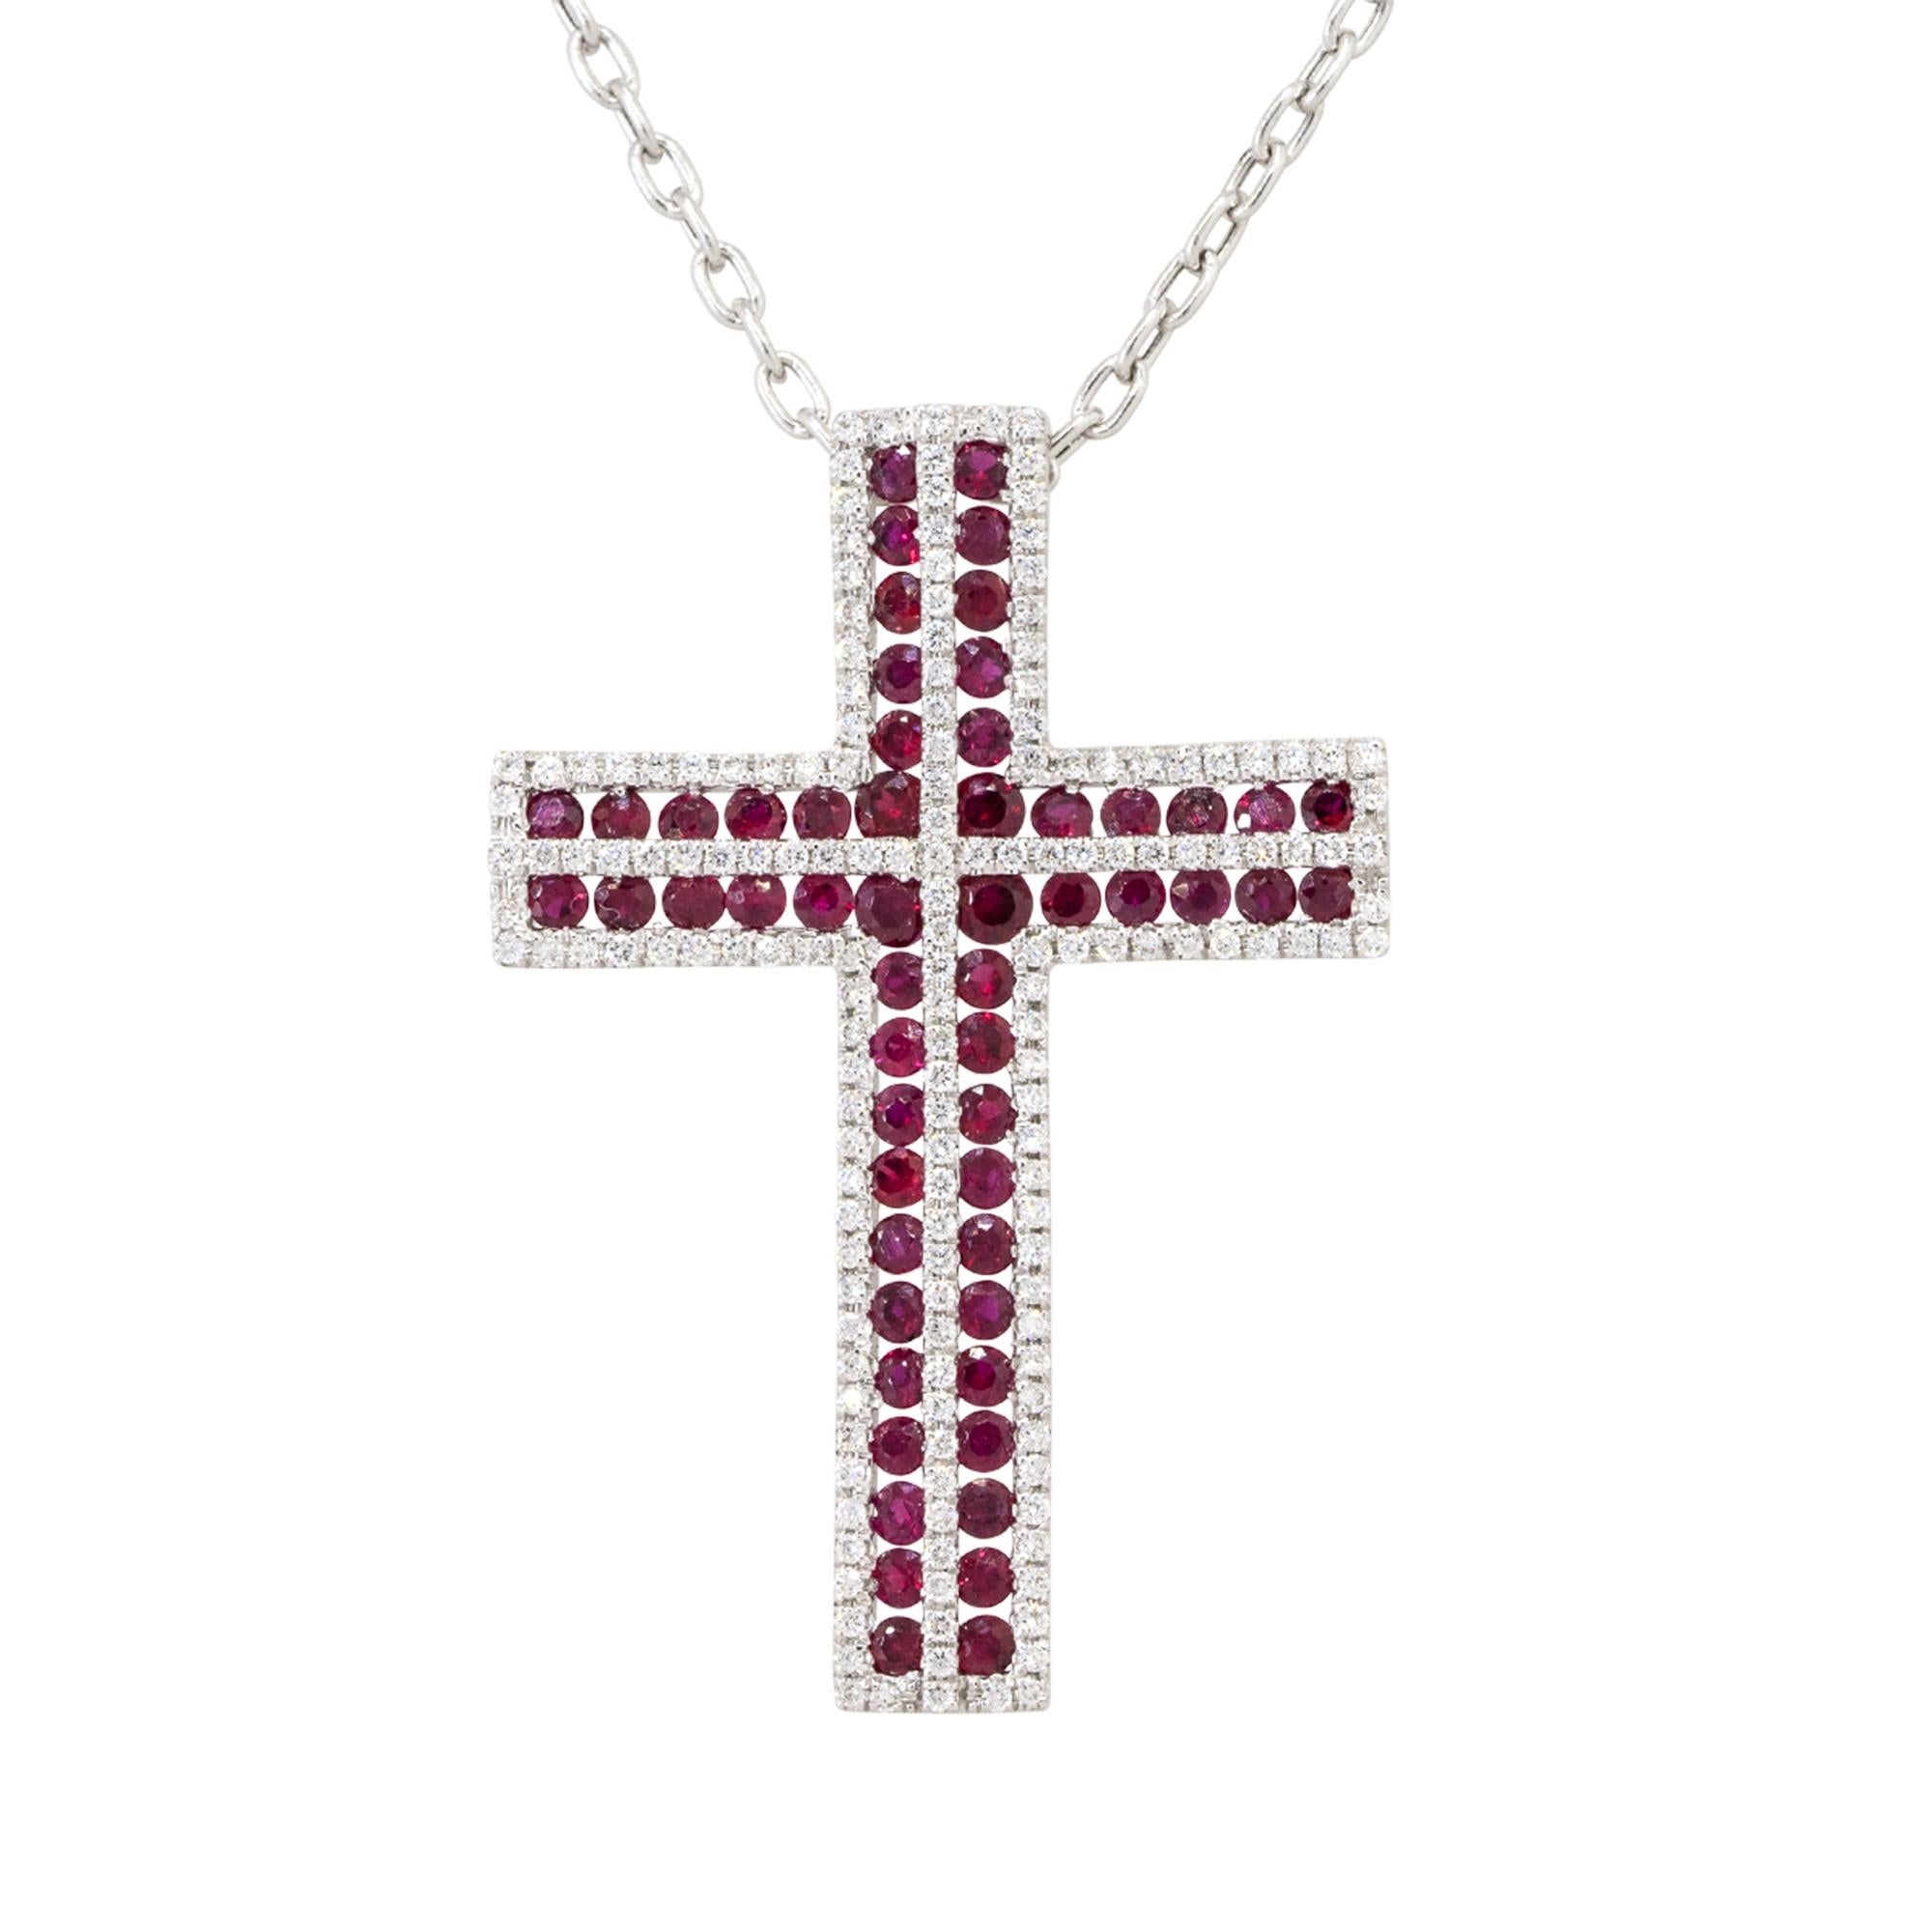 Material: 18k White Gold
Diamond Details: Approximately 0.46ctw of round cut Diamonds. Diamonds are G/H in color and VS in clarity
Gemstone Details: Approximately 1.60ctw of round cut Rubies
Clasps: Lobster Clasp
Total Weight: 6g (3.9dwt) 
Pendant